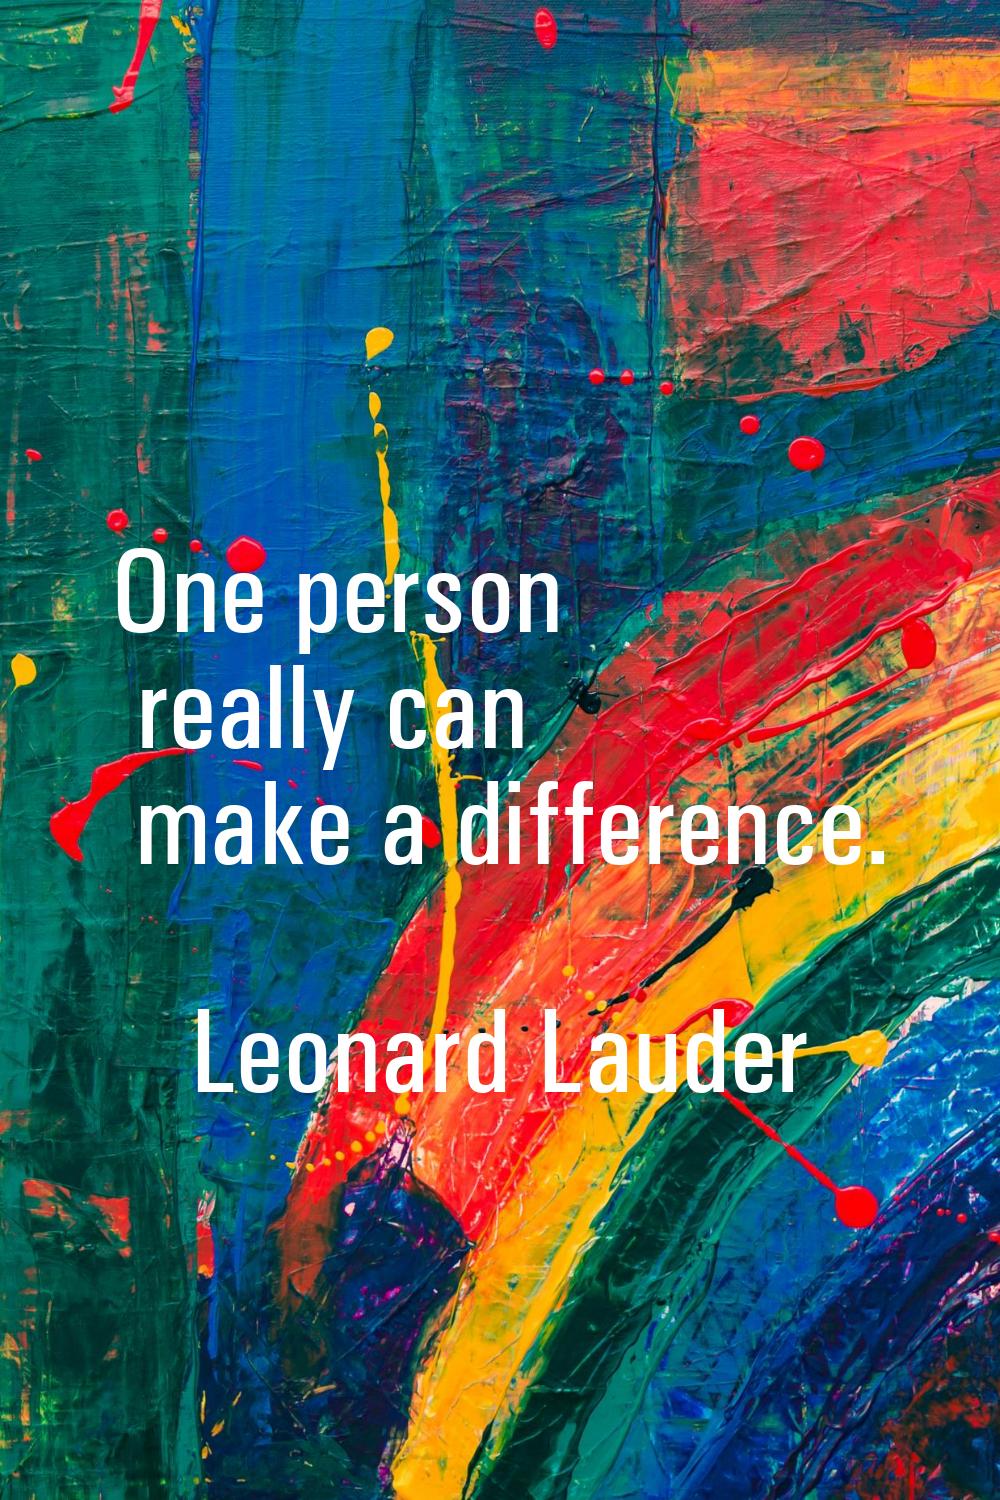 One person really can make a difference.